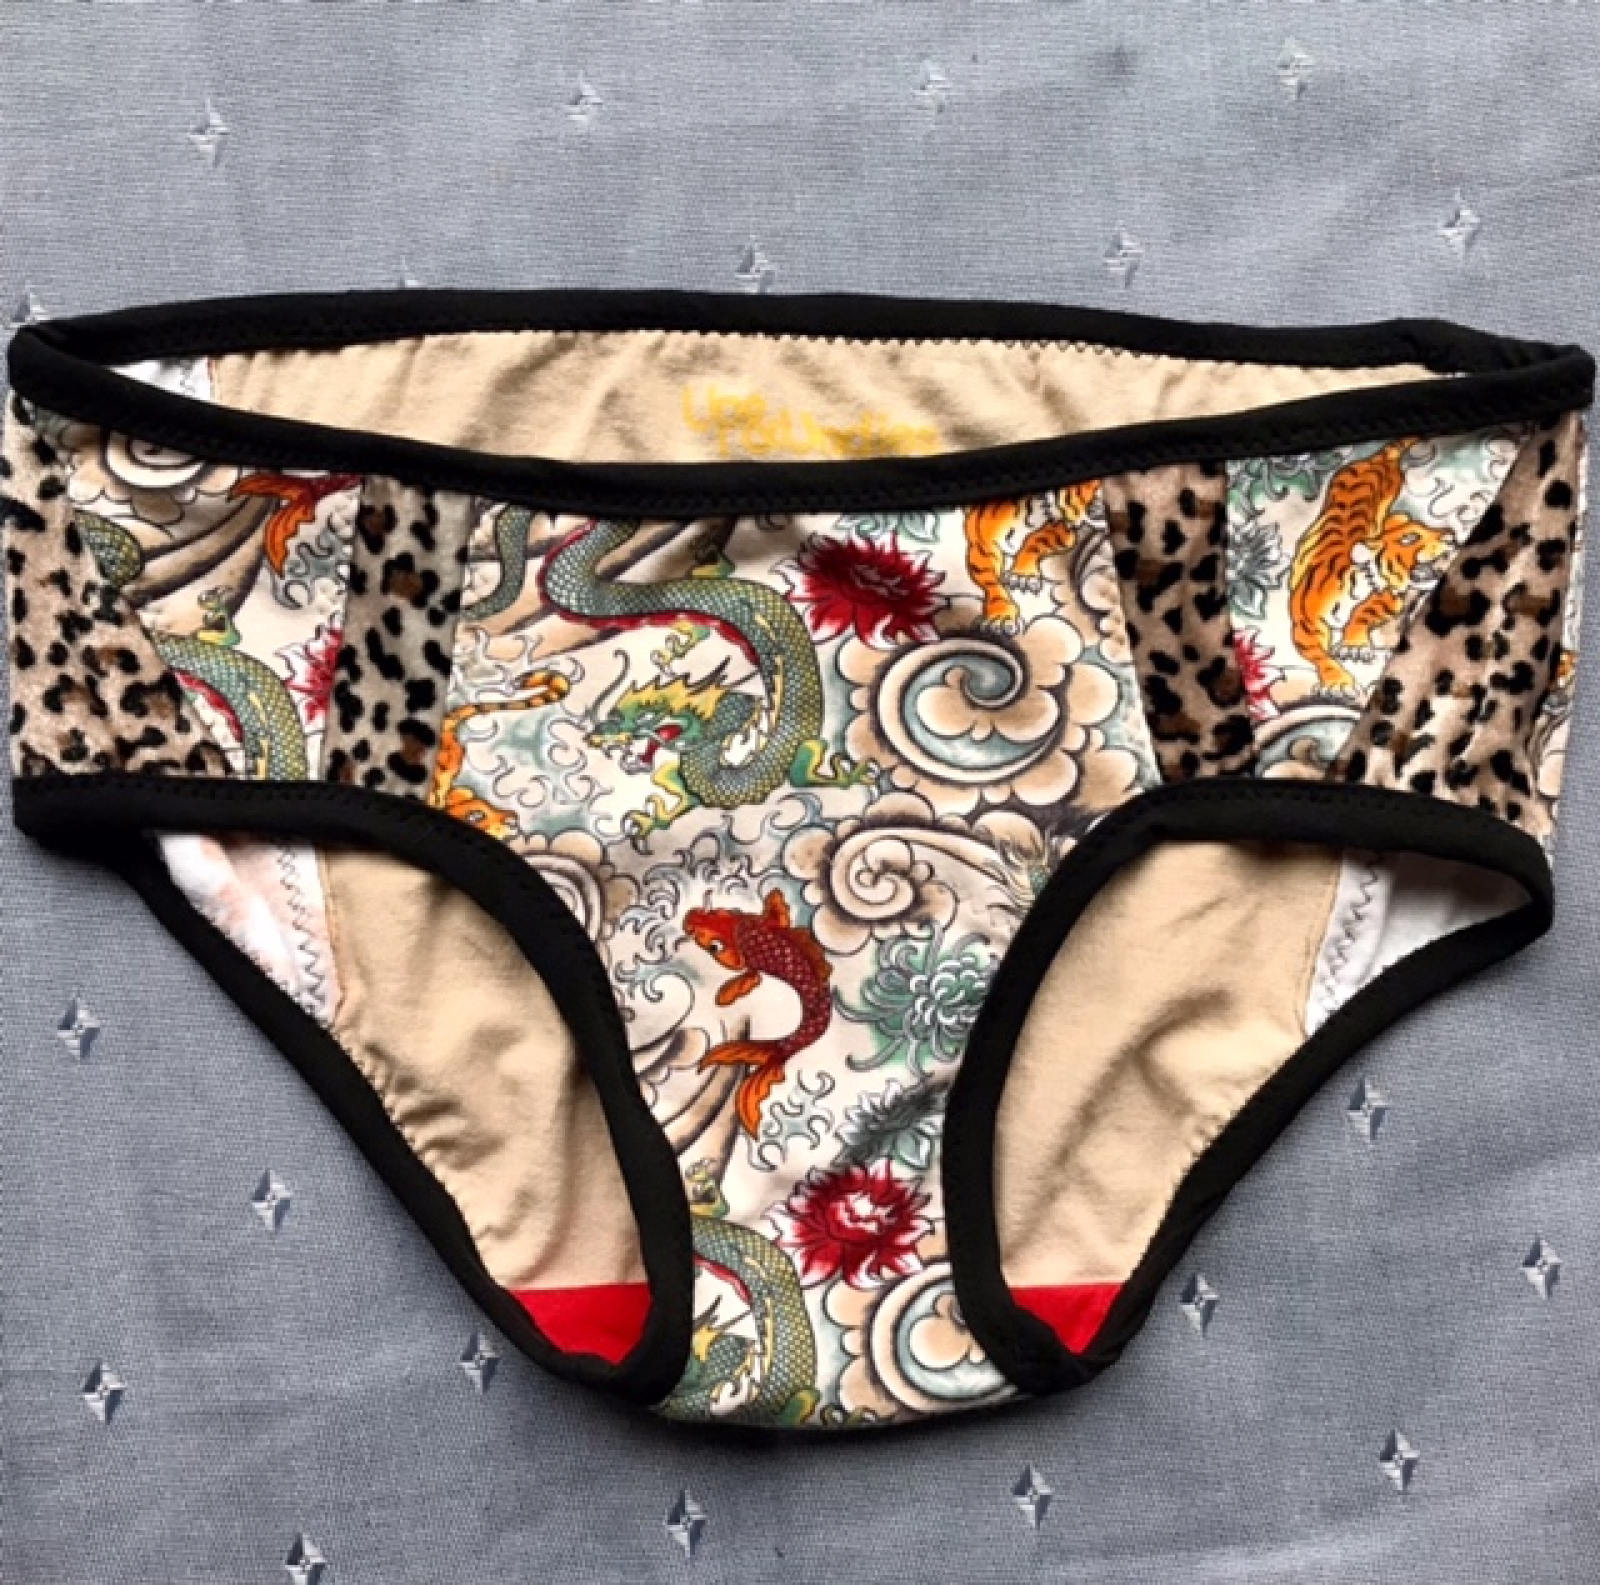 Painted Lady: medium undies made from Tshirts